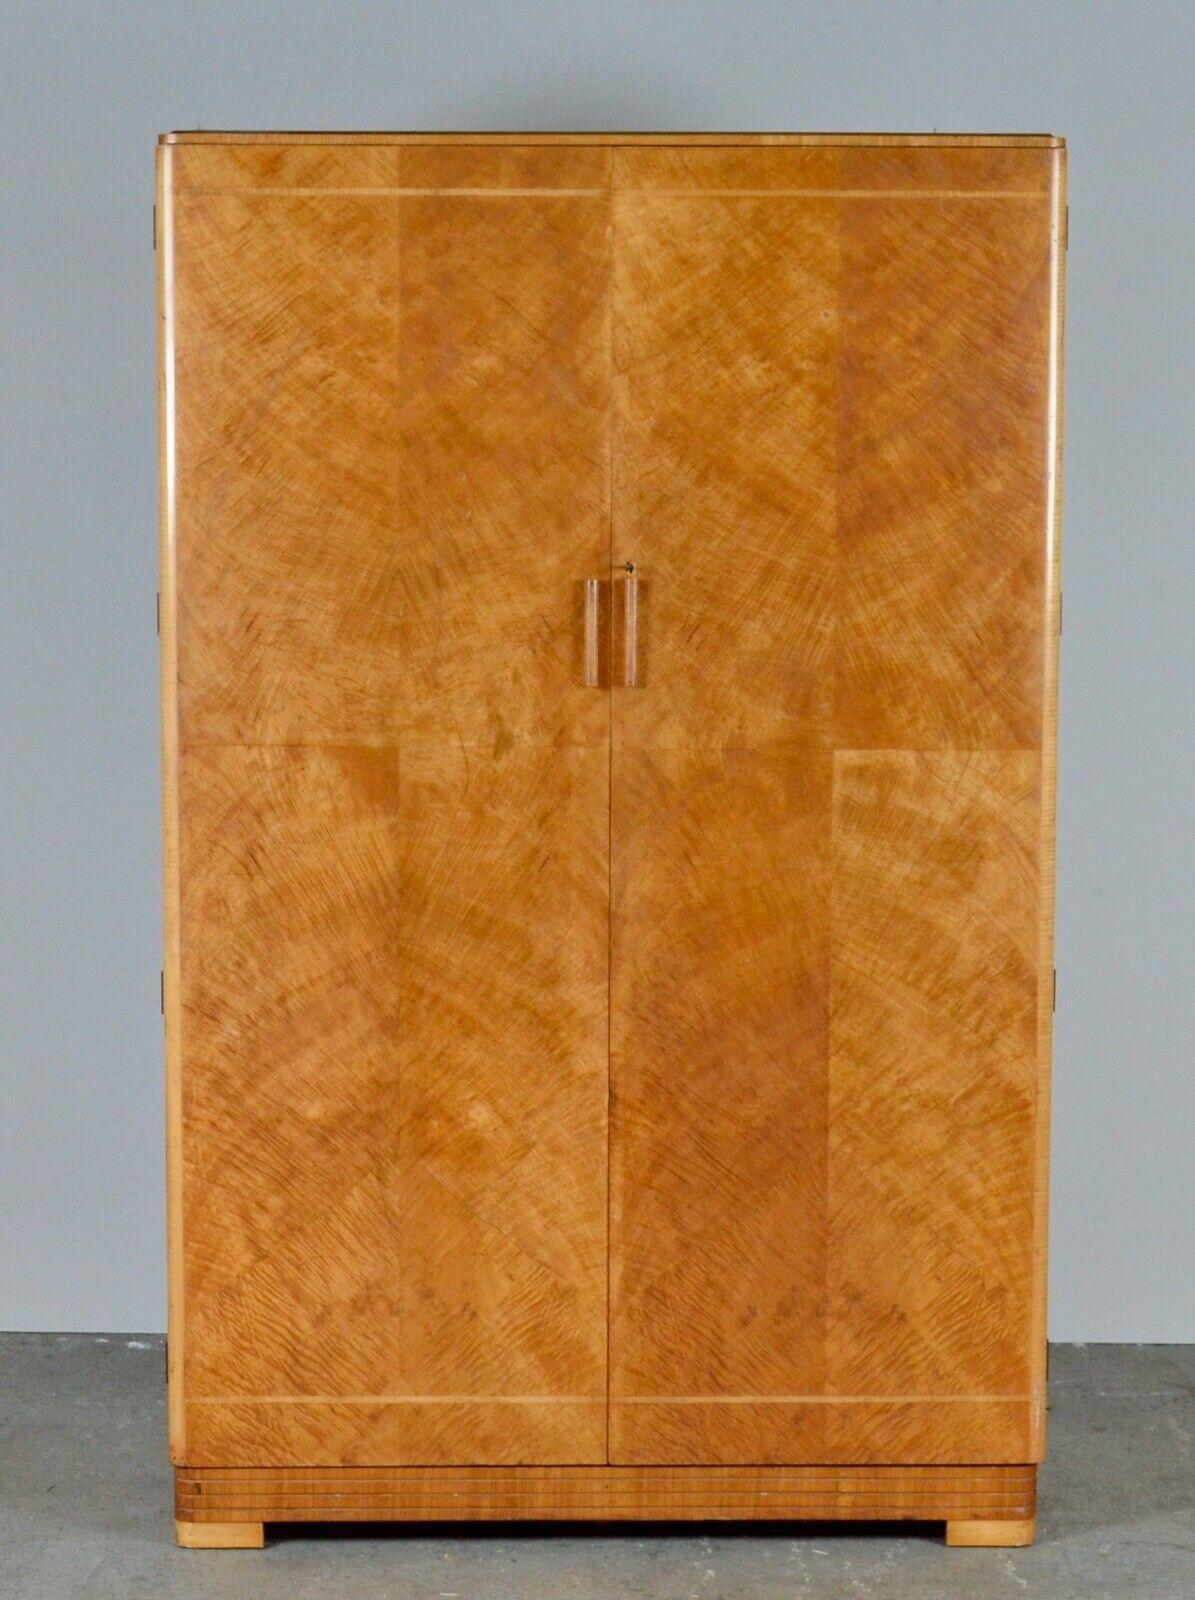 We are delighted to offer for sale this mid 20th century Army & Navy Ltd Art Deco style Maple wardrobe. A very good-looking double wardrobe the wood is rich maple and glows in the light, it has a small shelf and generous hanging space. It’s a very